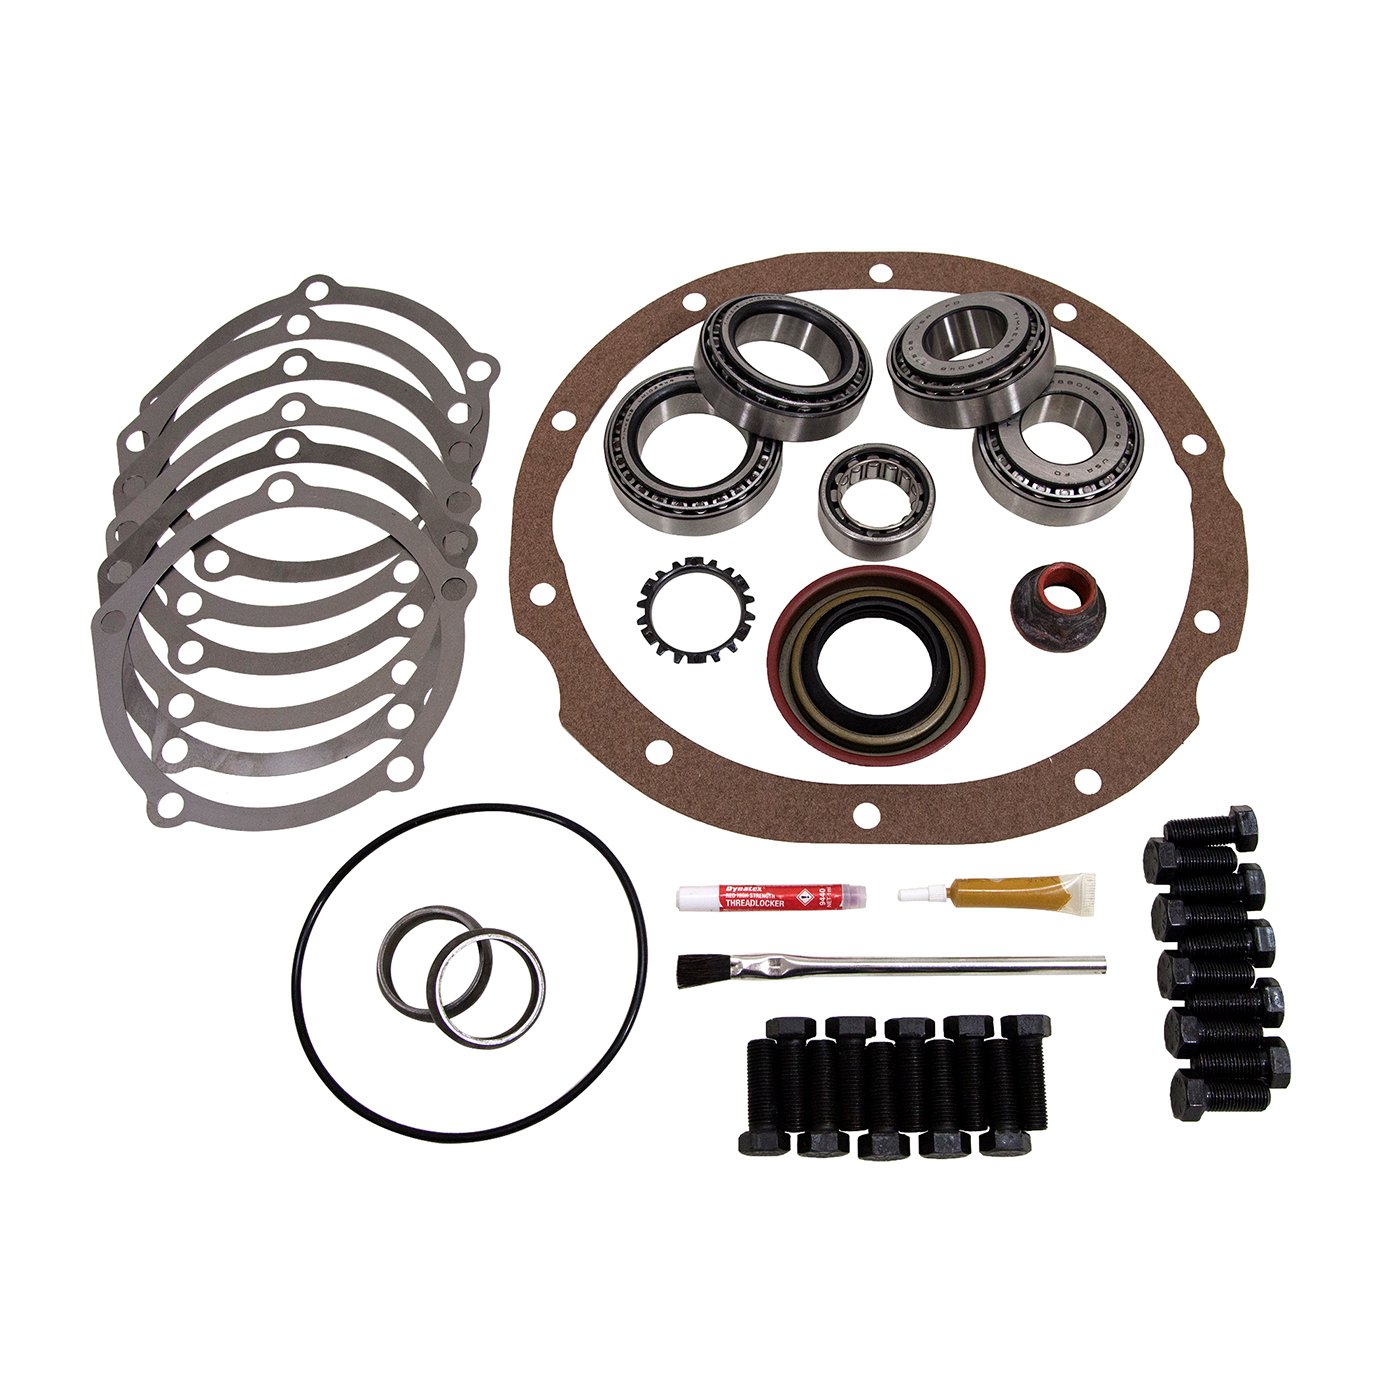 USA Standard ZK F9-A Master Overhaul Kit, For The Ford 9 in. Lm102910 Differential